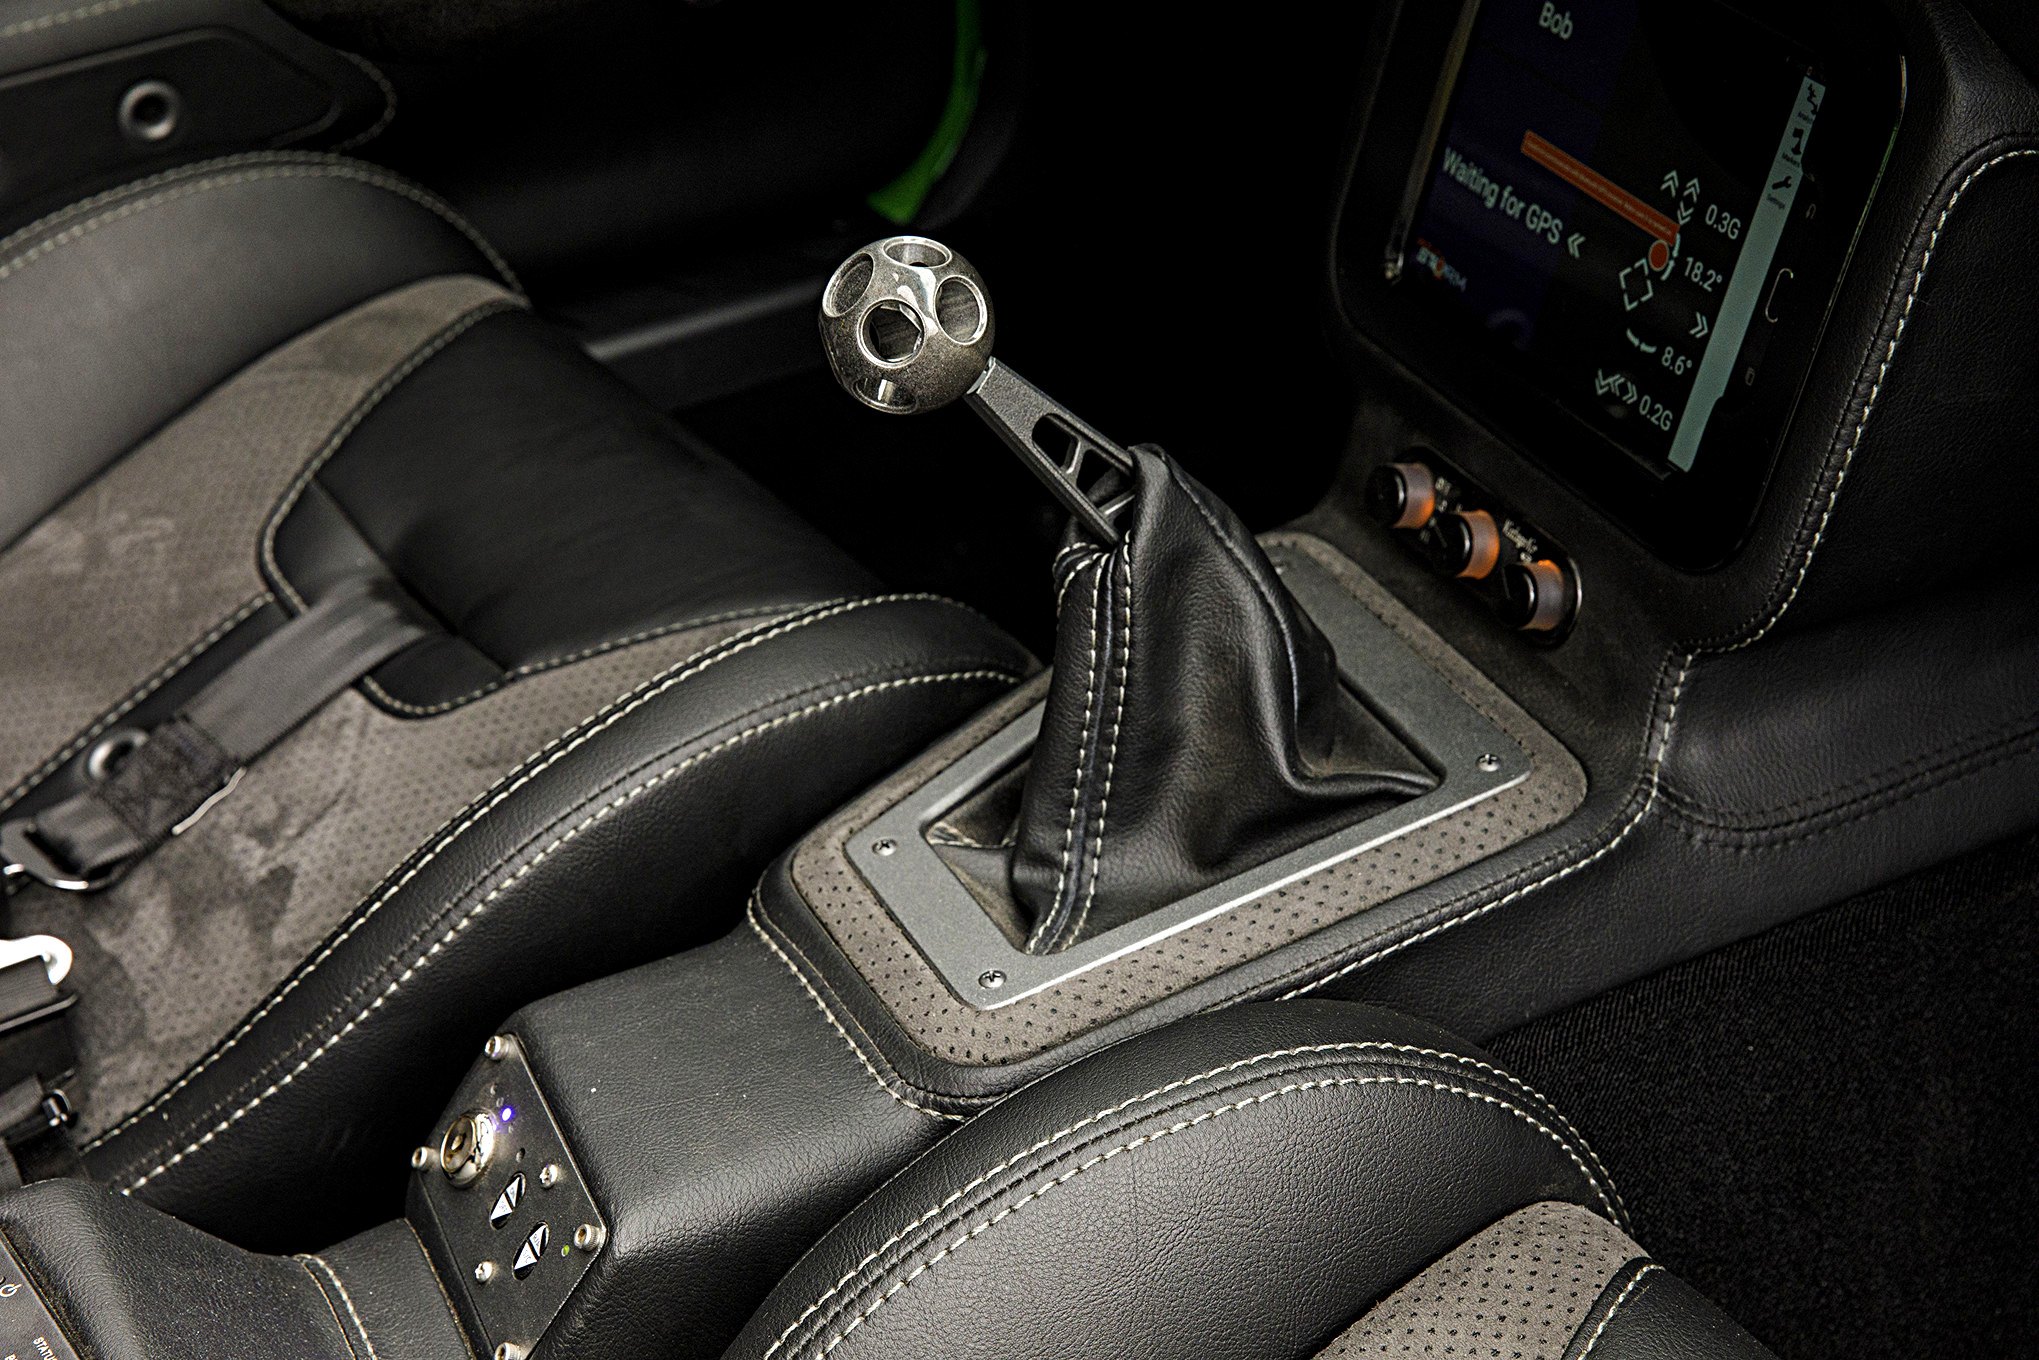 Green Debadged Chevy Corvette with Custom Shift Knob - Photo by Robert McGaffin